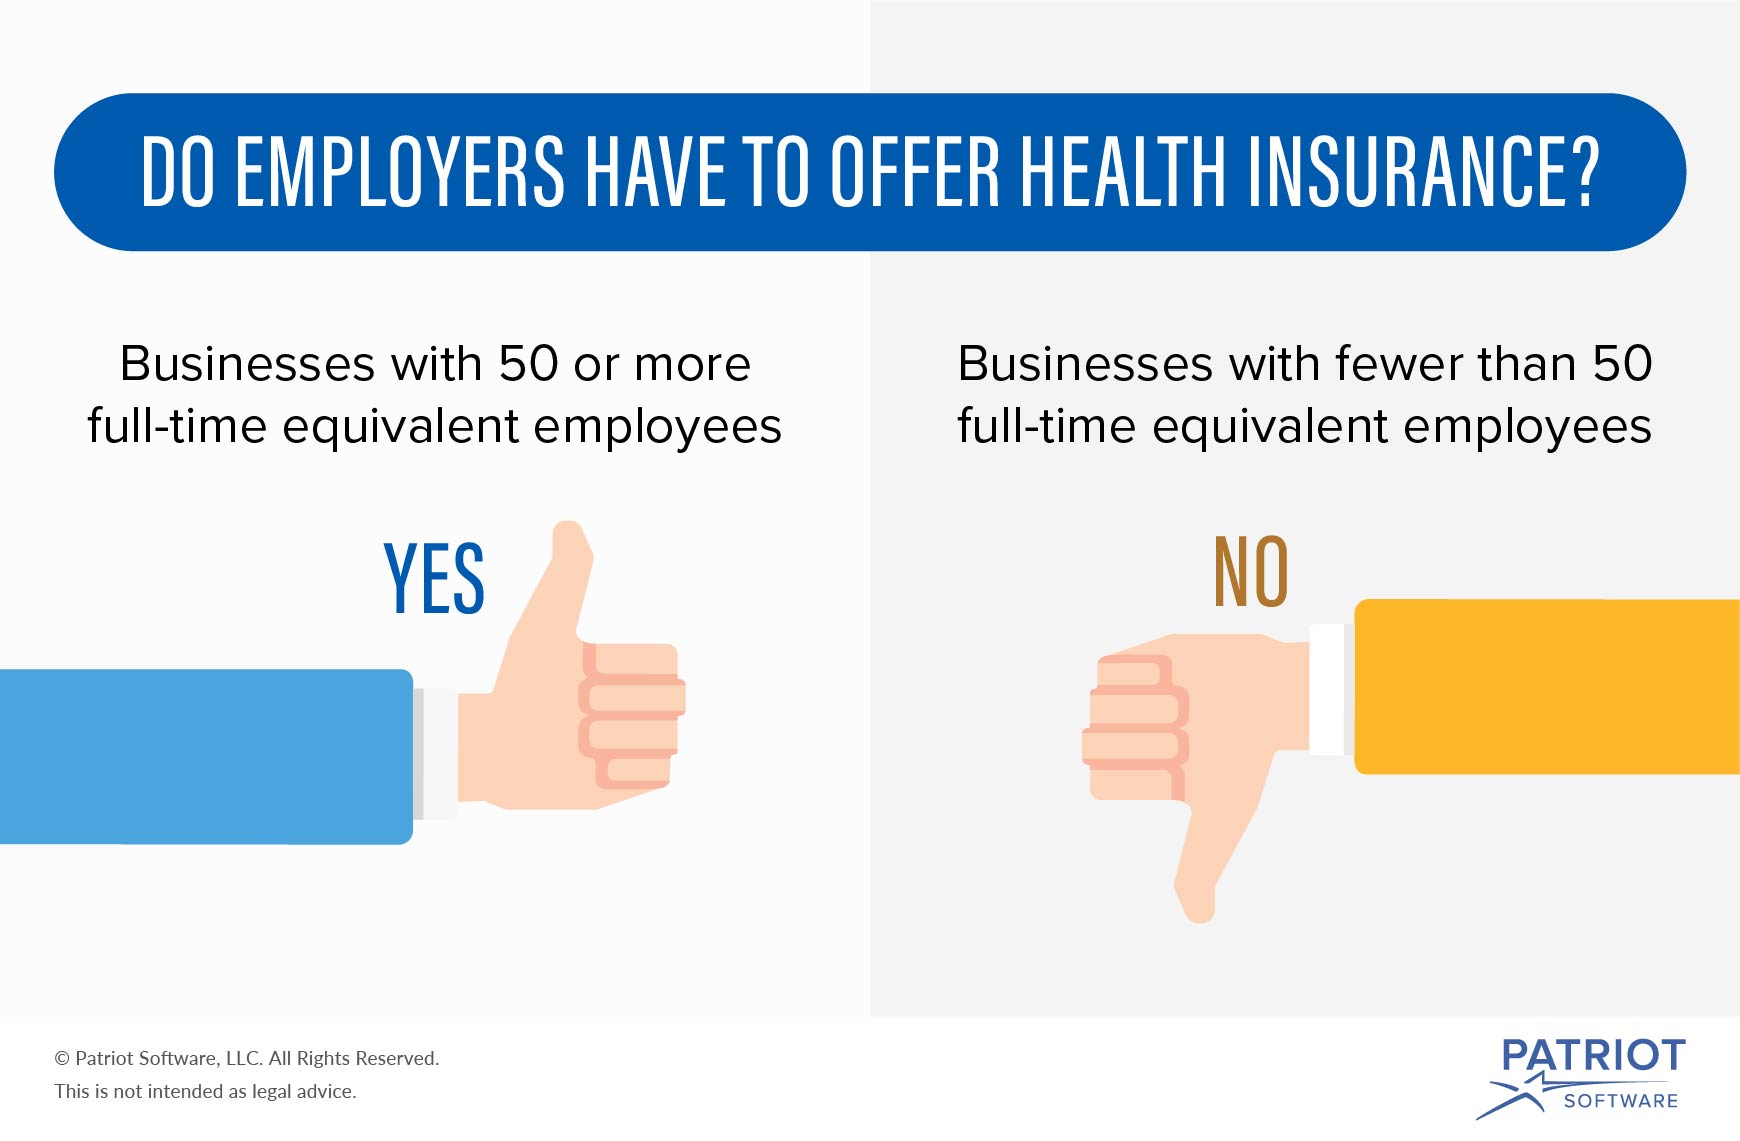 Do employers have to offer health insurance